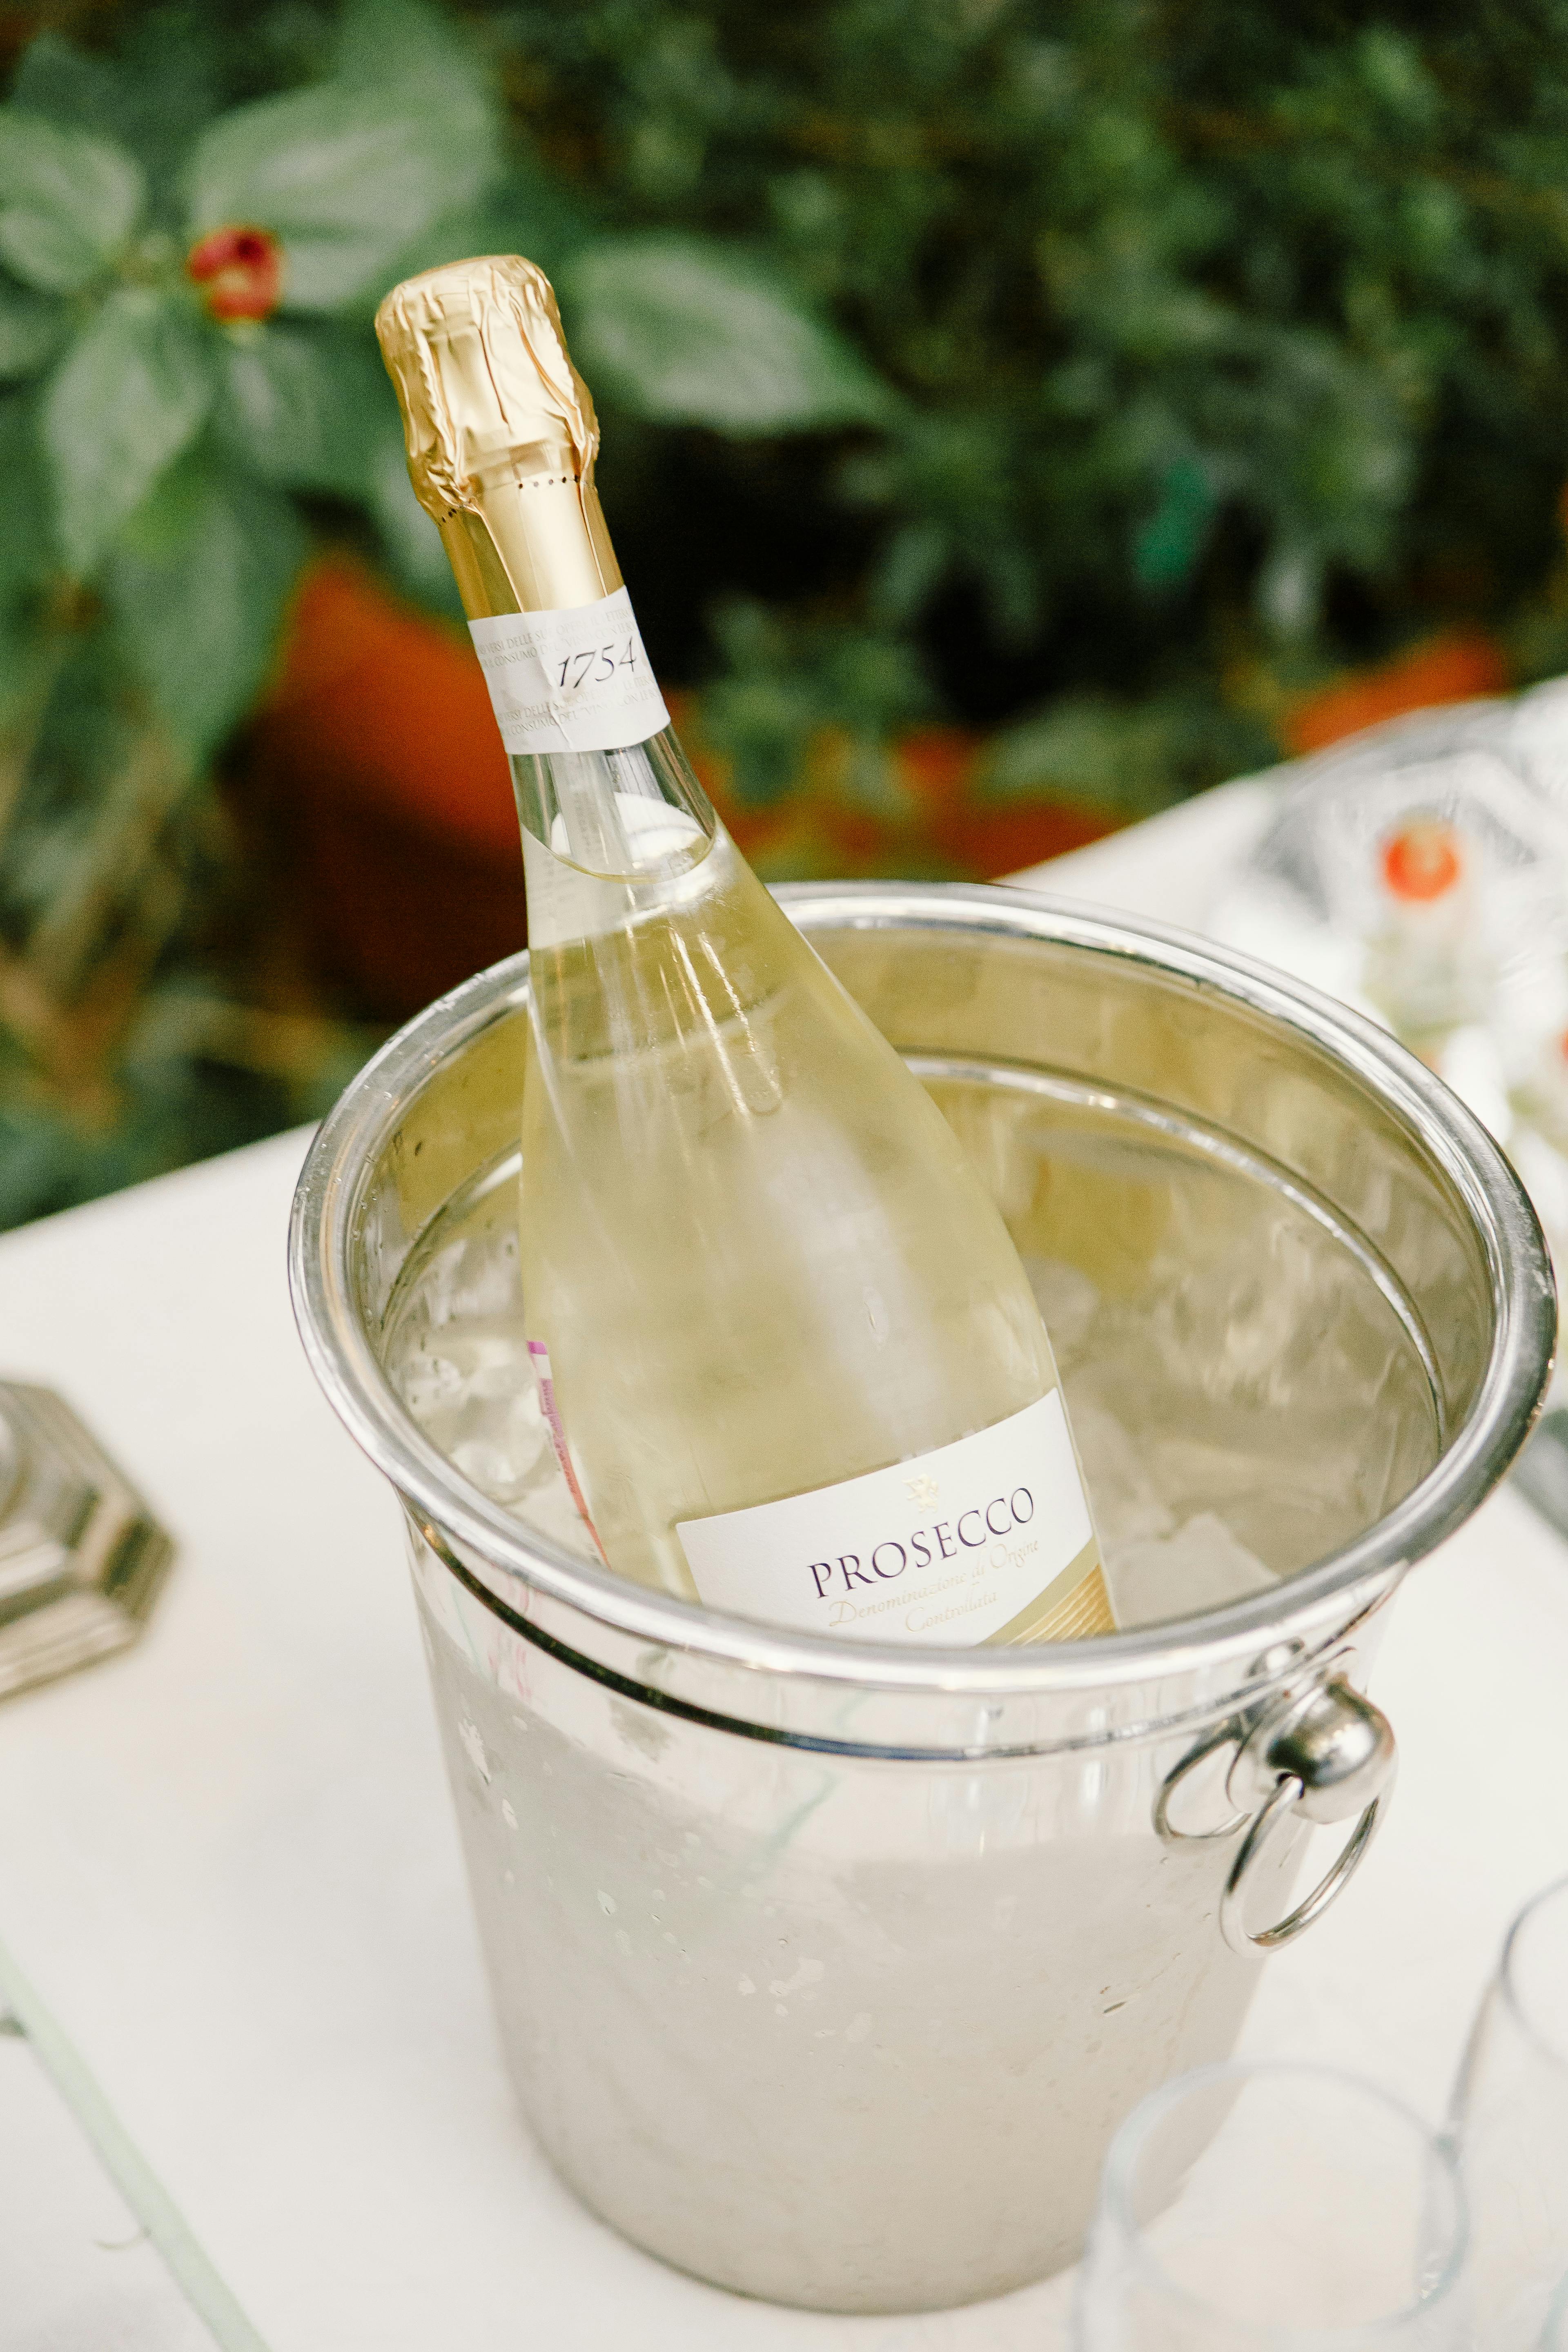 champagne bottle in ice bucket on banquet table